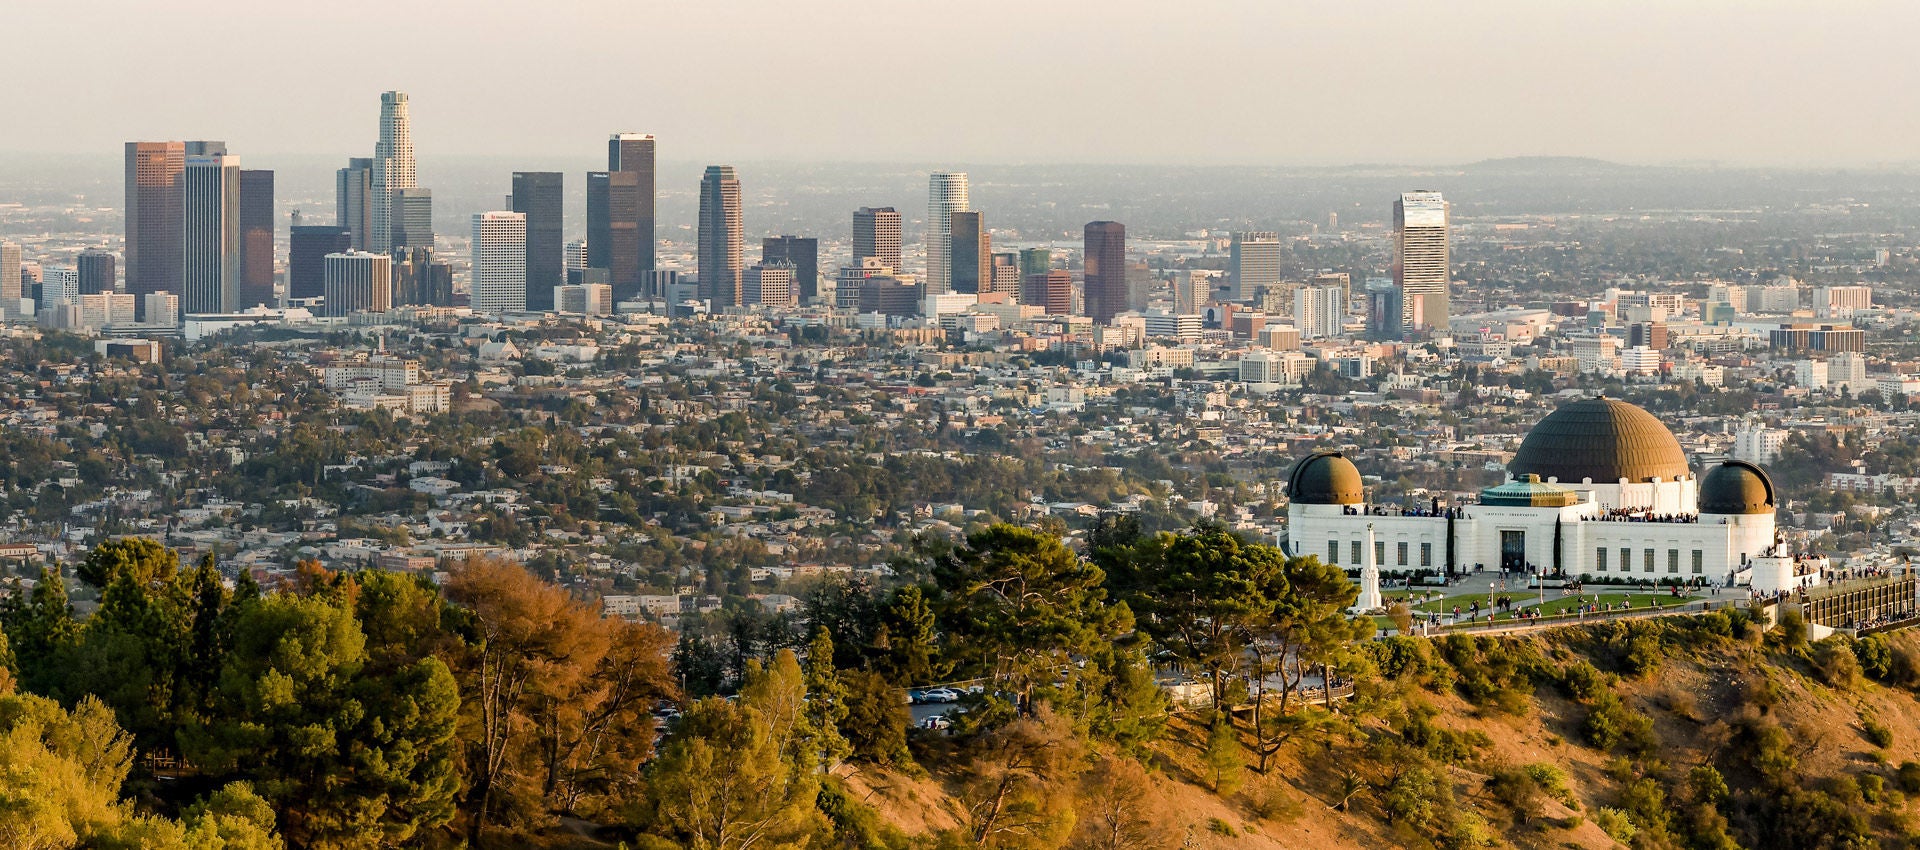 The Griffith Observatory sits in front of the Los Angeles skyline and city below the hill. 